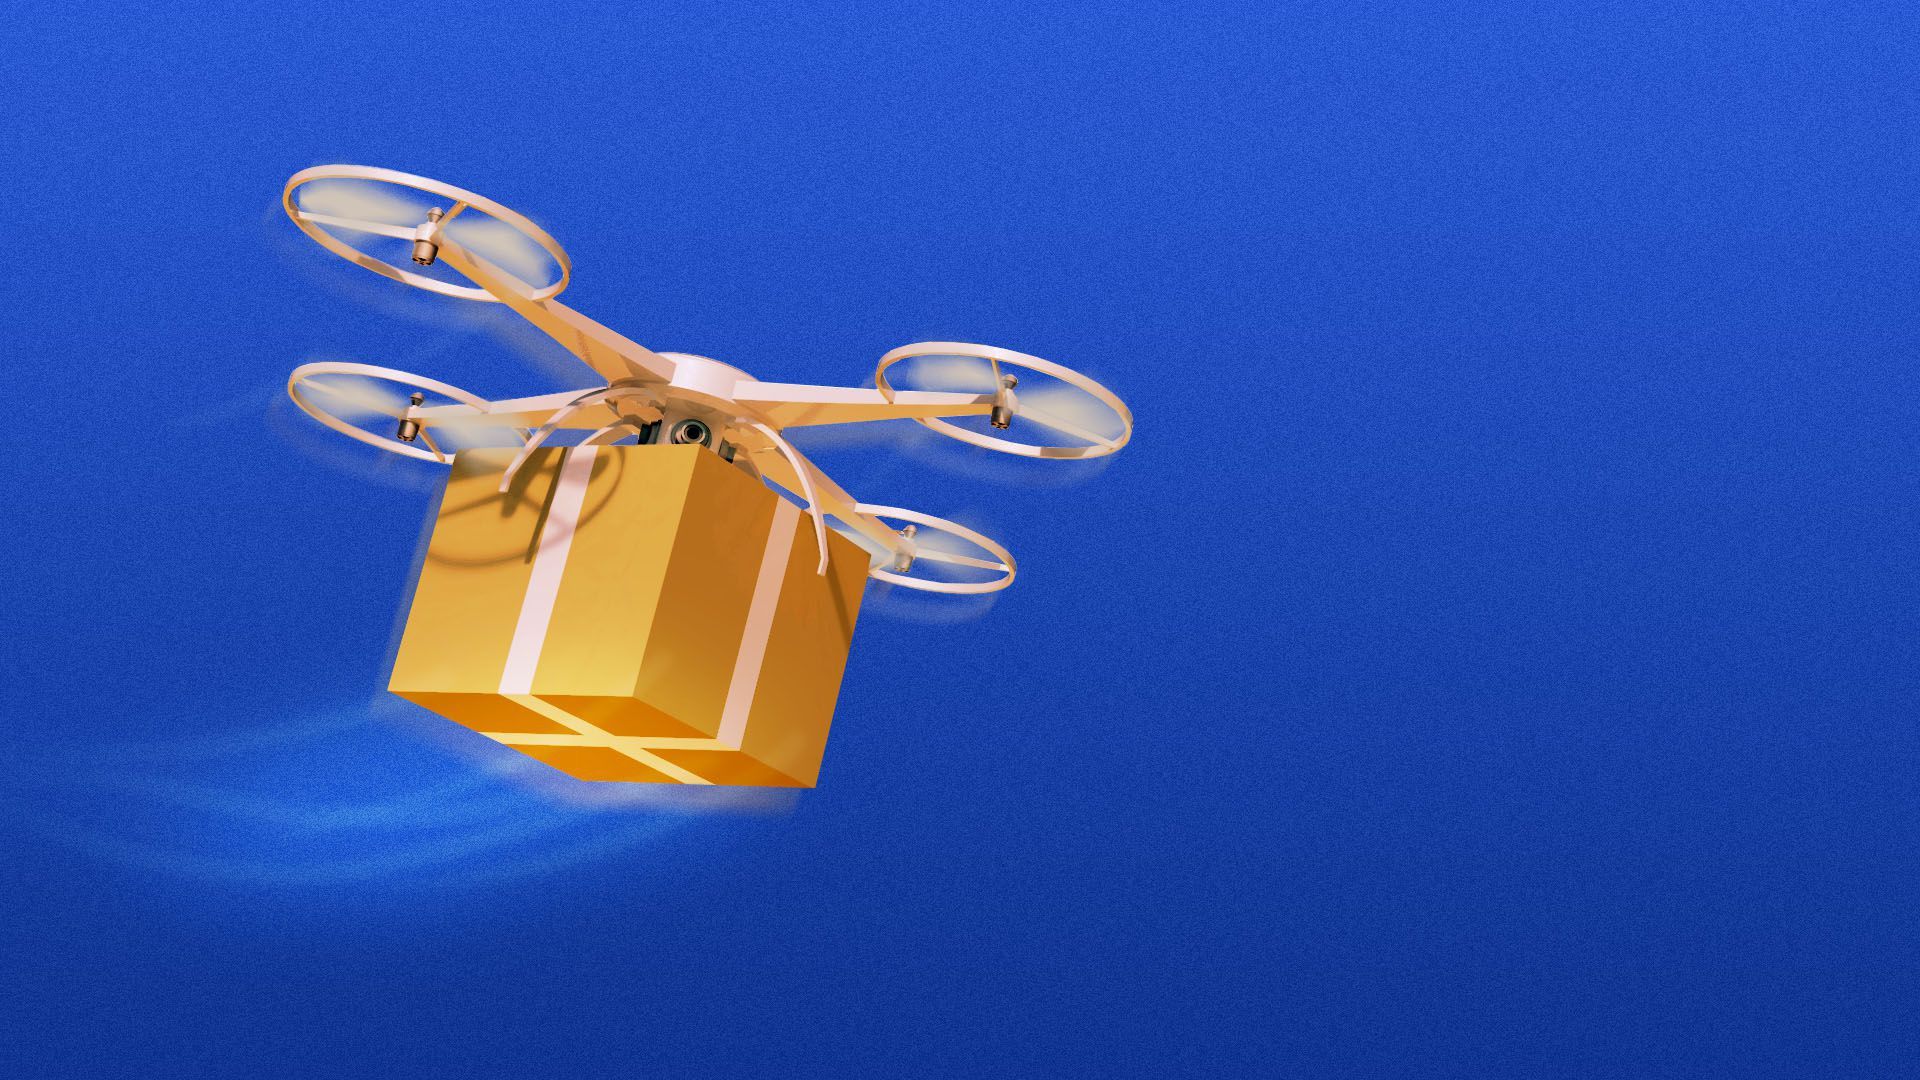 Drone with package illustration